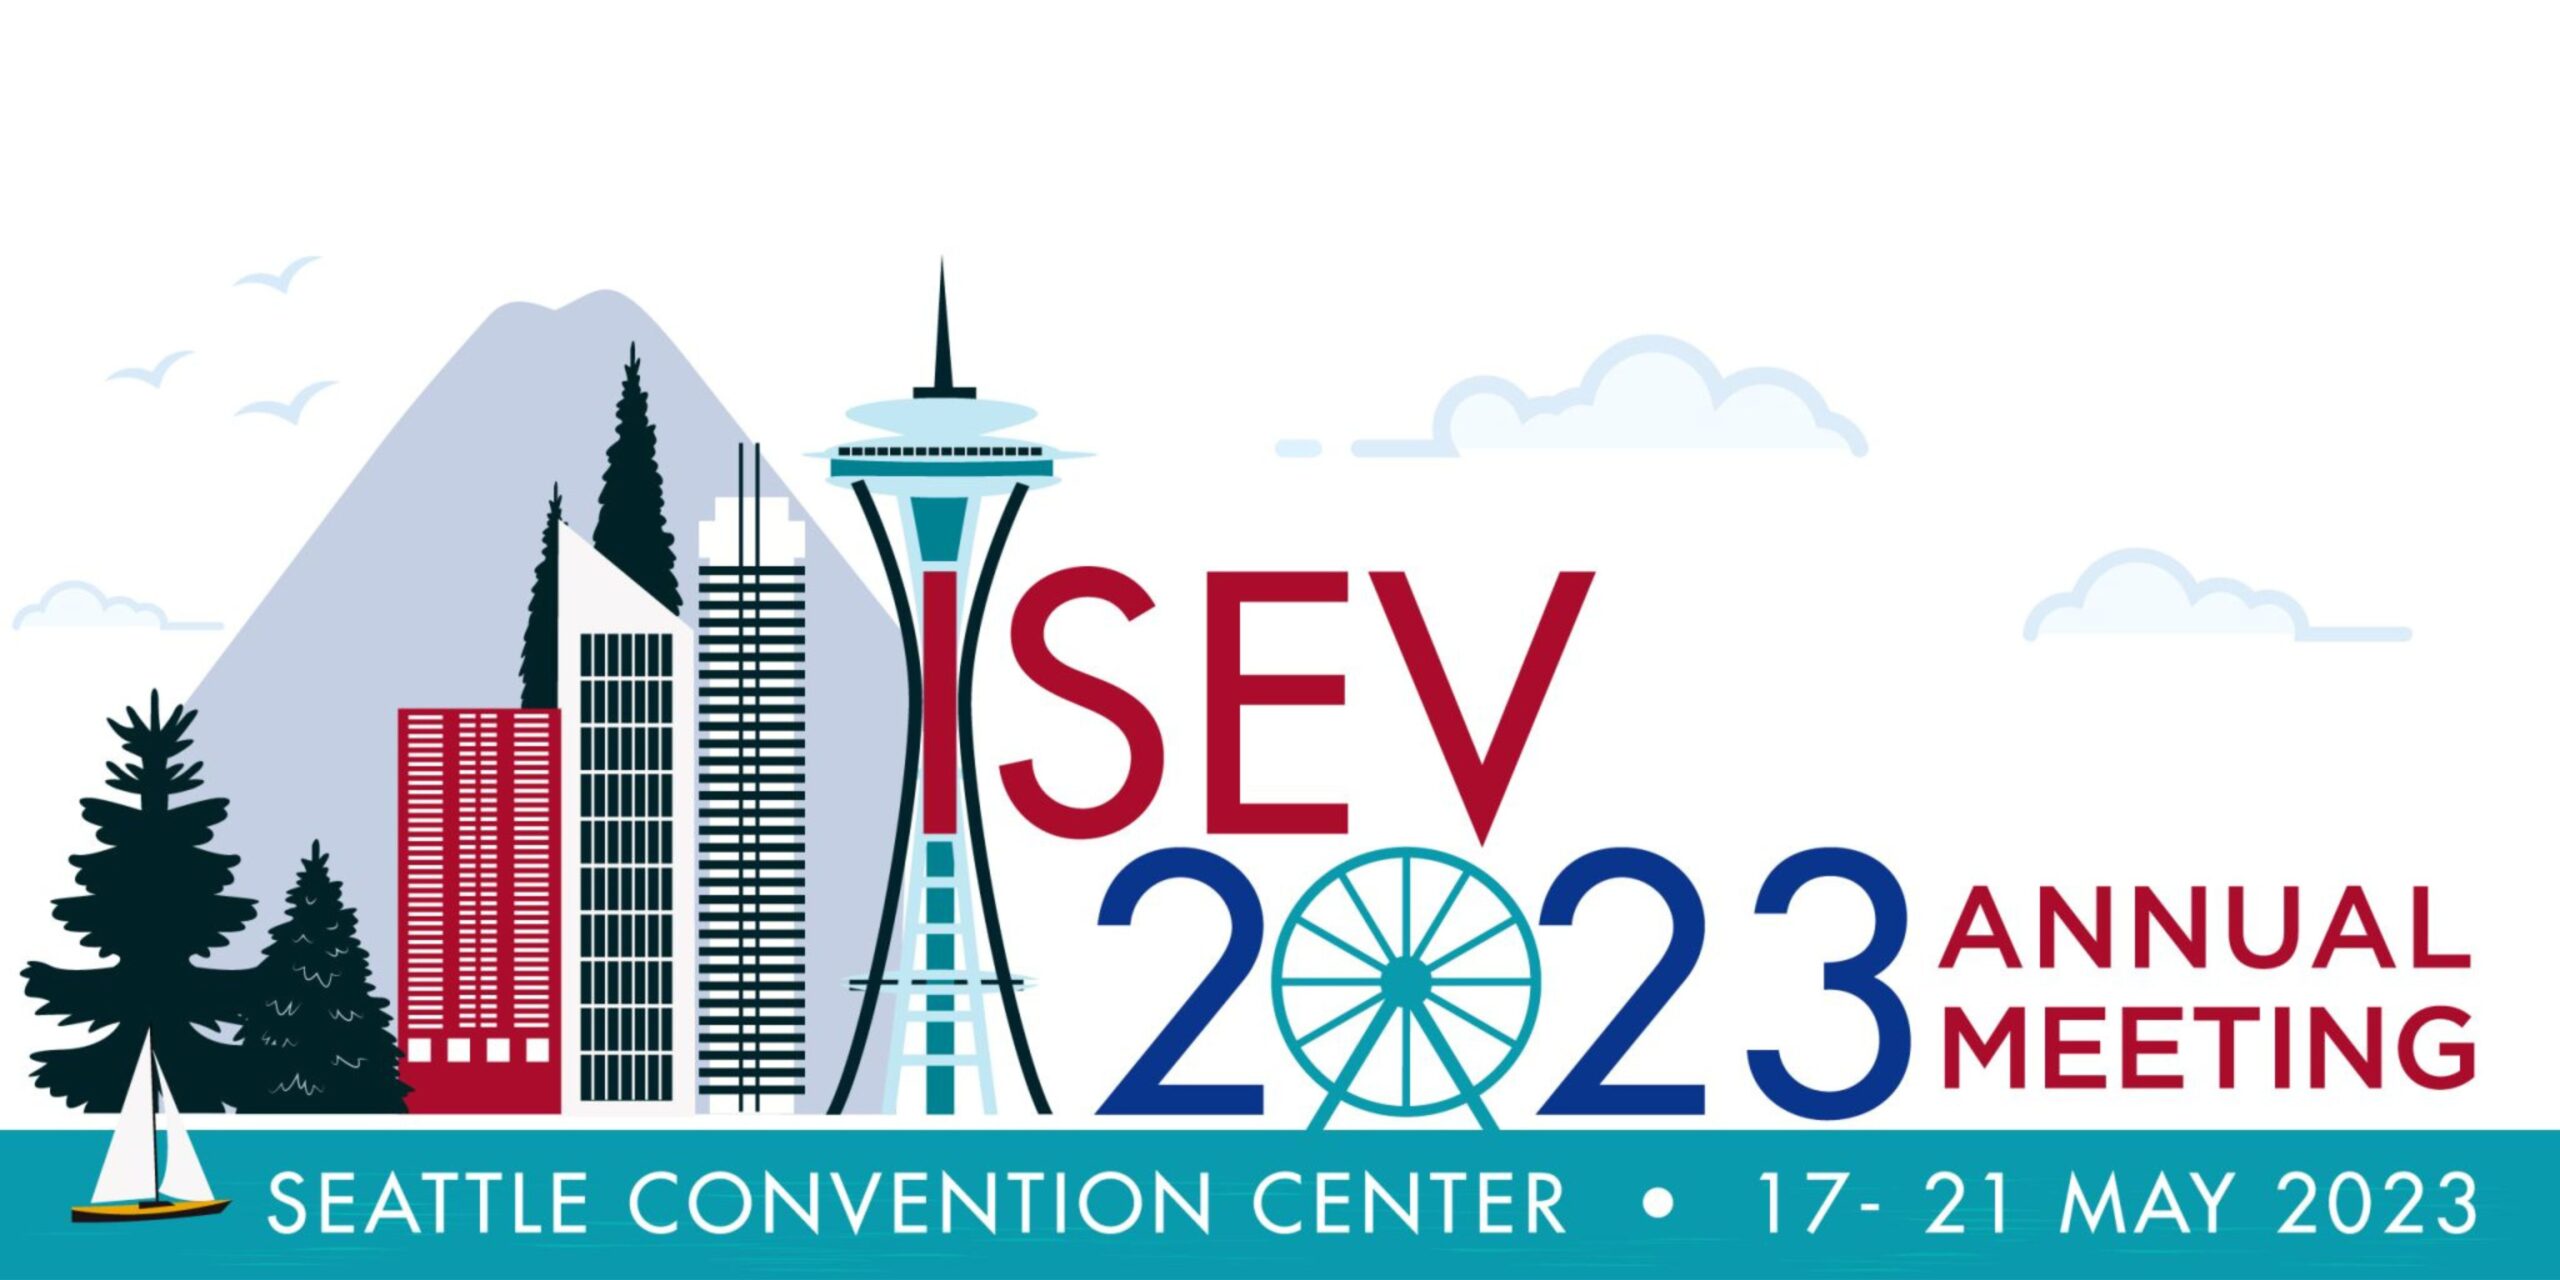 SiMPore Technology for Single Extracellular Vesicle Visualization Presented at ISEV 2023